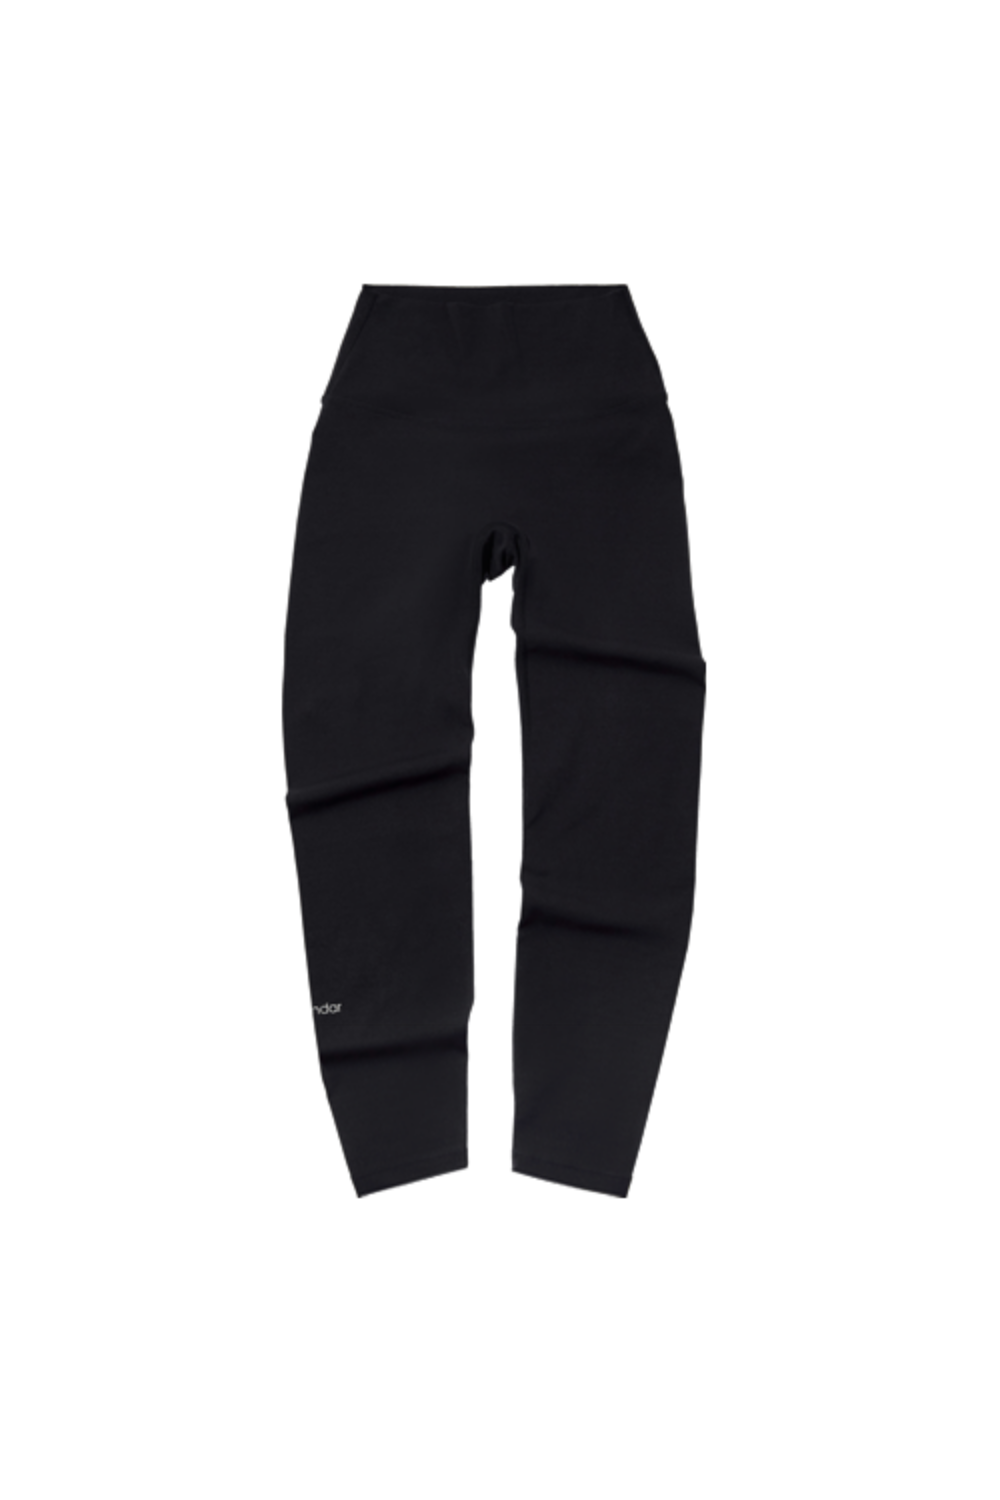 Aircooling Sustainable Ankle Length Legging